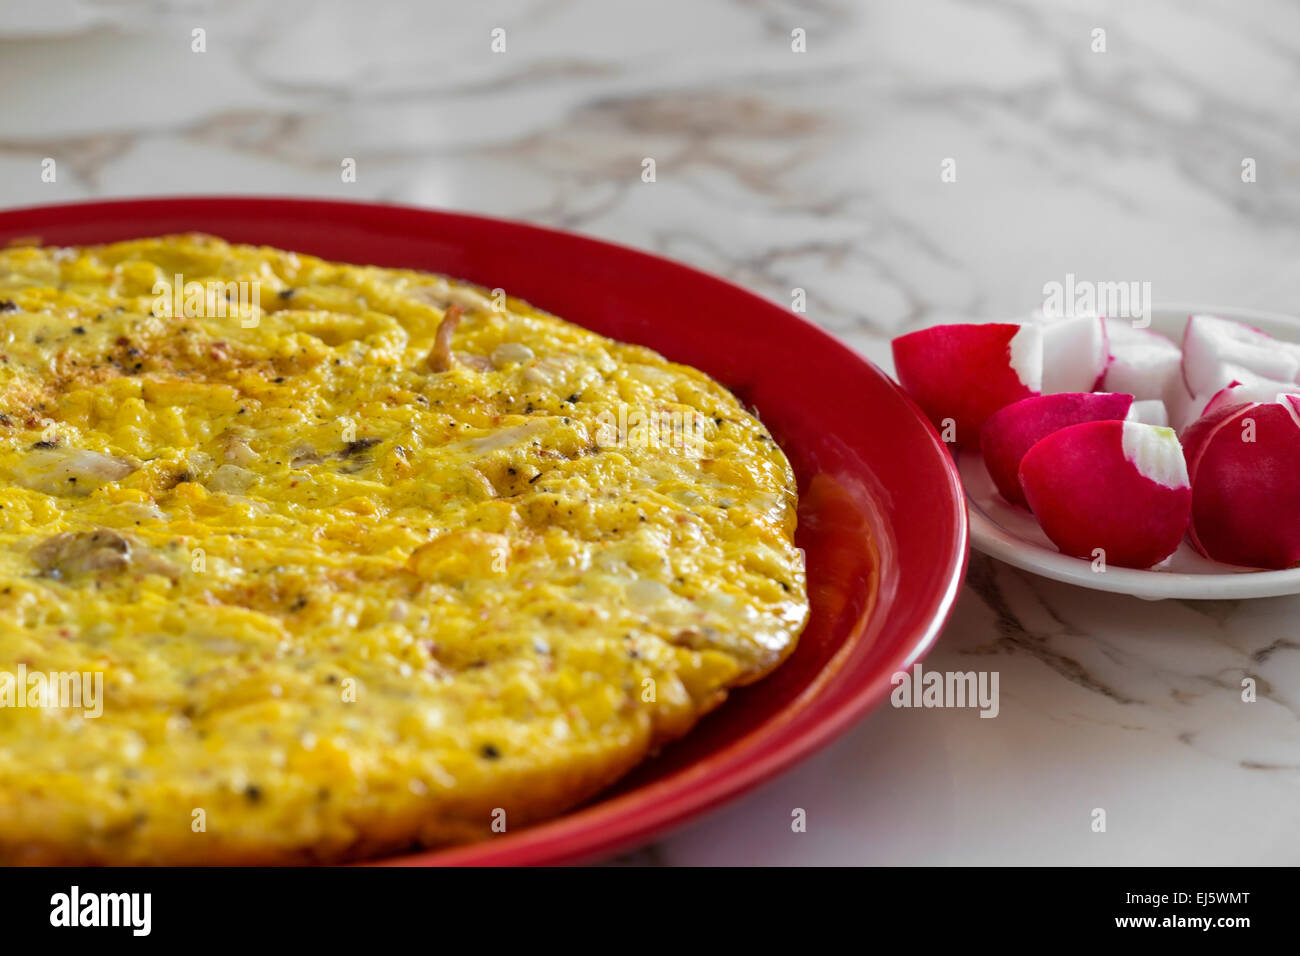 Omelet with cheese and radishes on a red plate Stock Photo